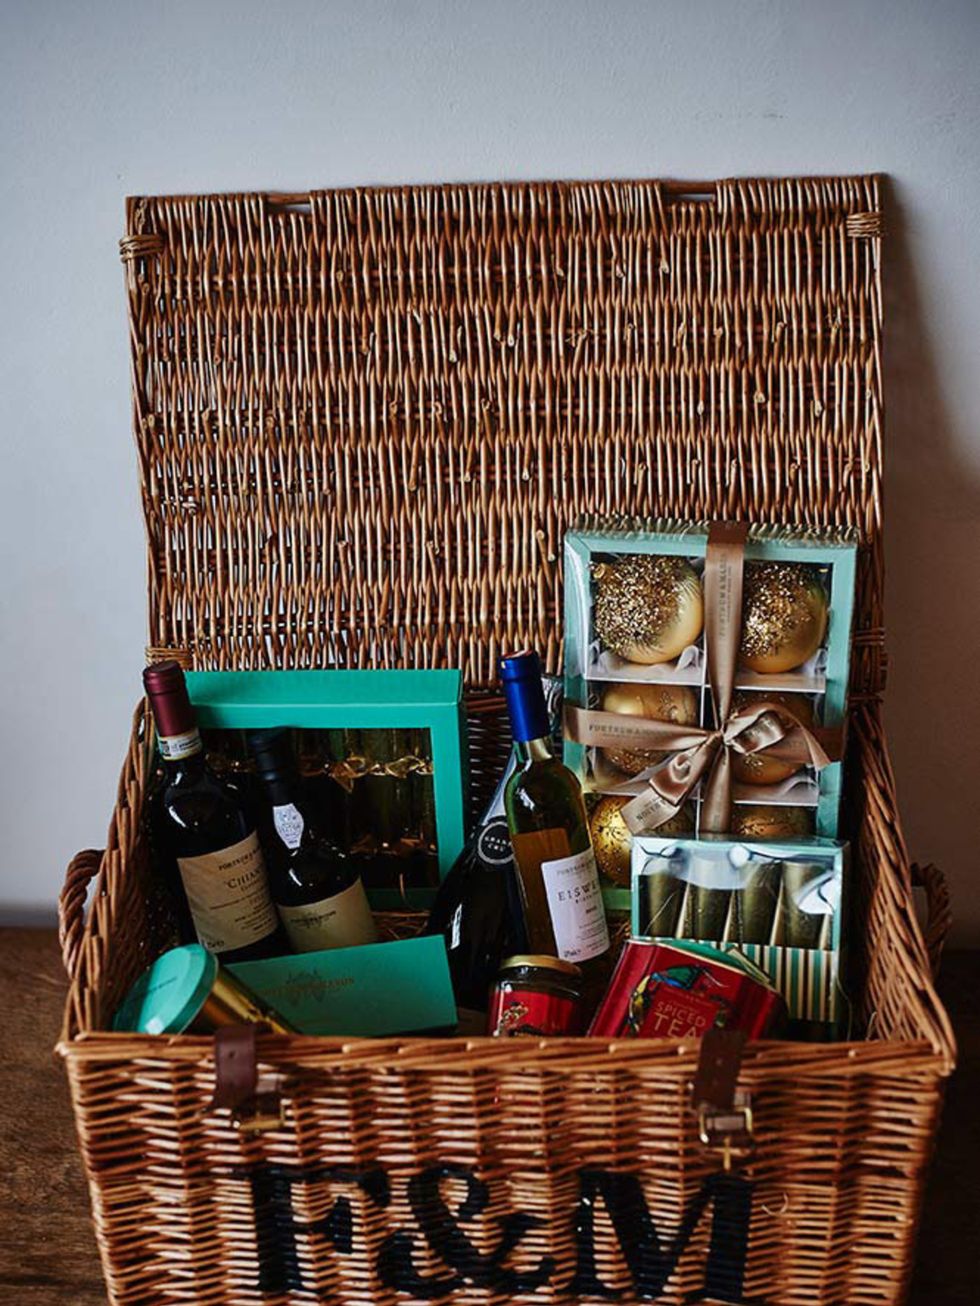 <p><strong>MUST-HAVE HAMPERS</strong></p>

<p>Hampers are the ultimate luxury gift, something you would never buy for yourself - the grown up answer to a selection box.</p>

<p><strong>The Club-Together-Classic  <a href="http://fortnumandmason.com" targe